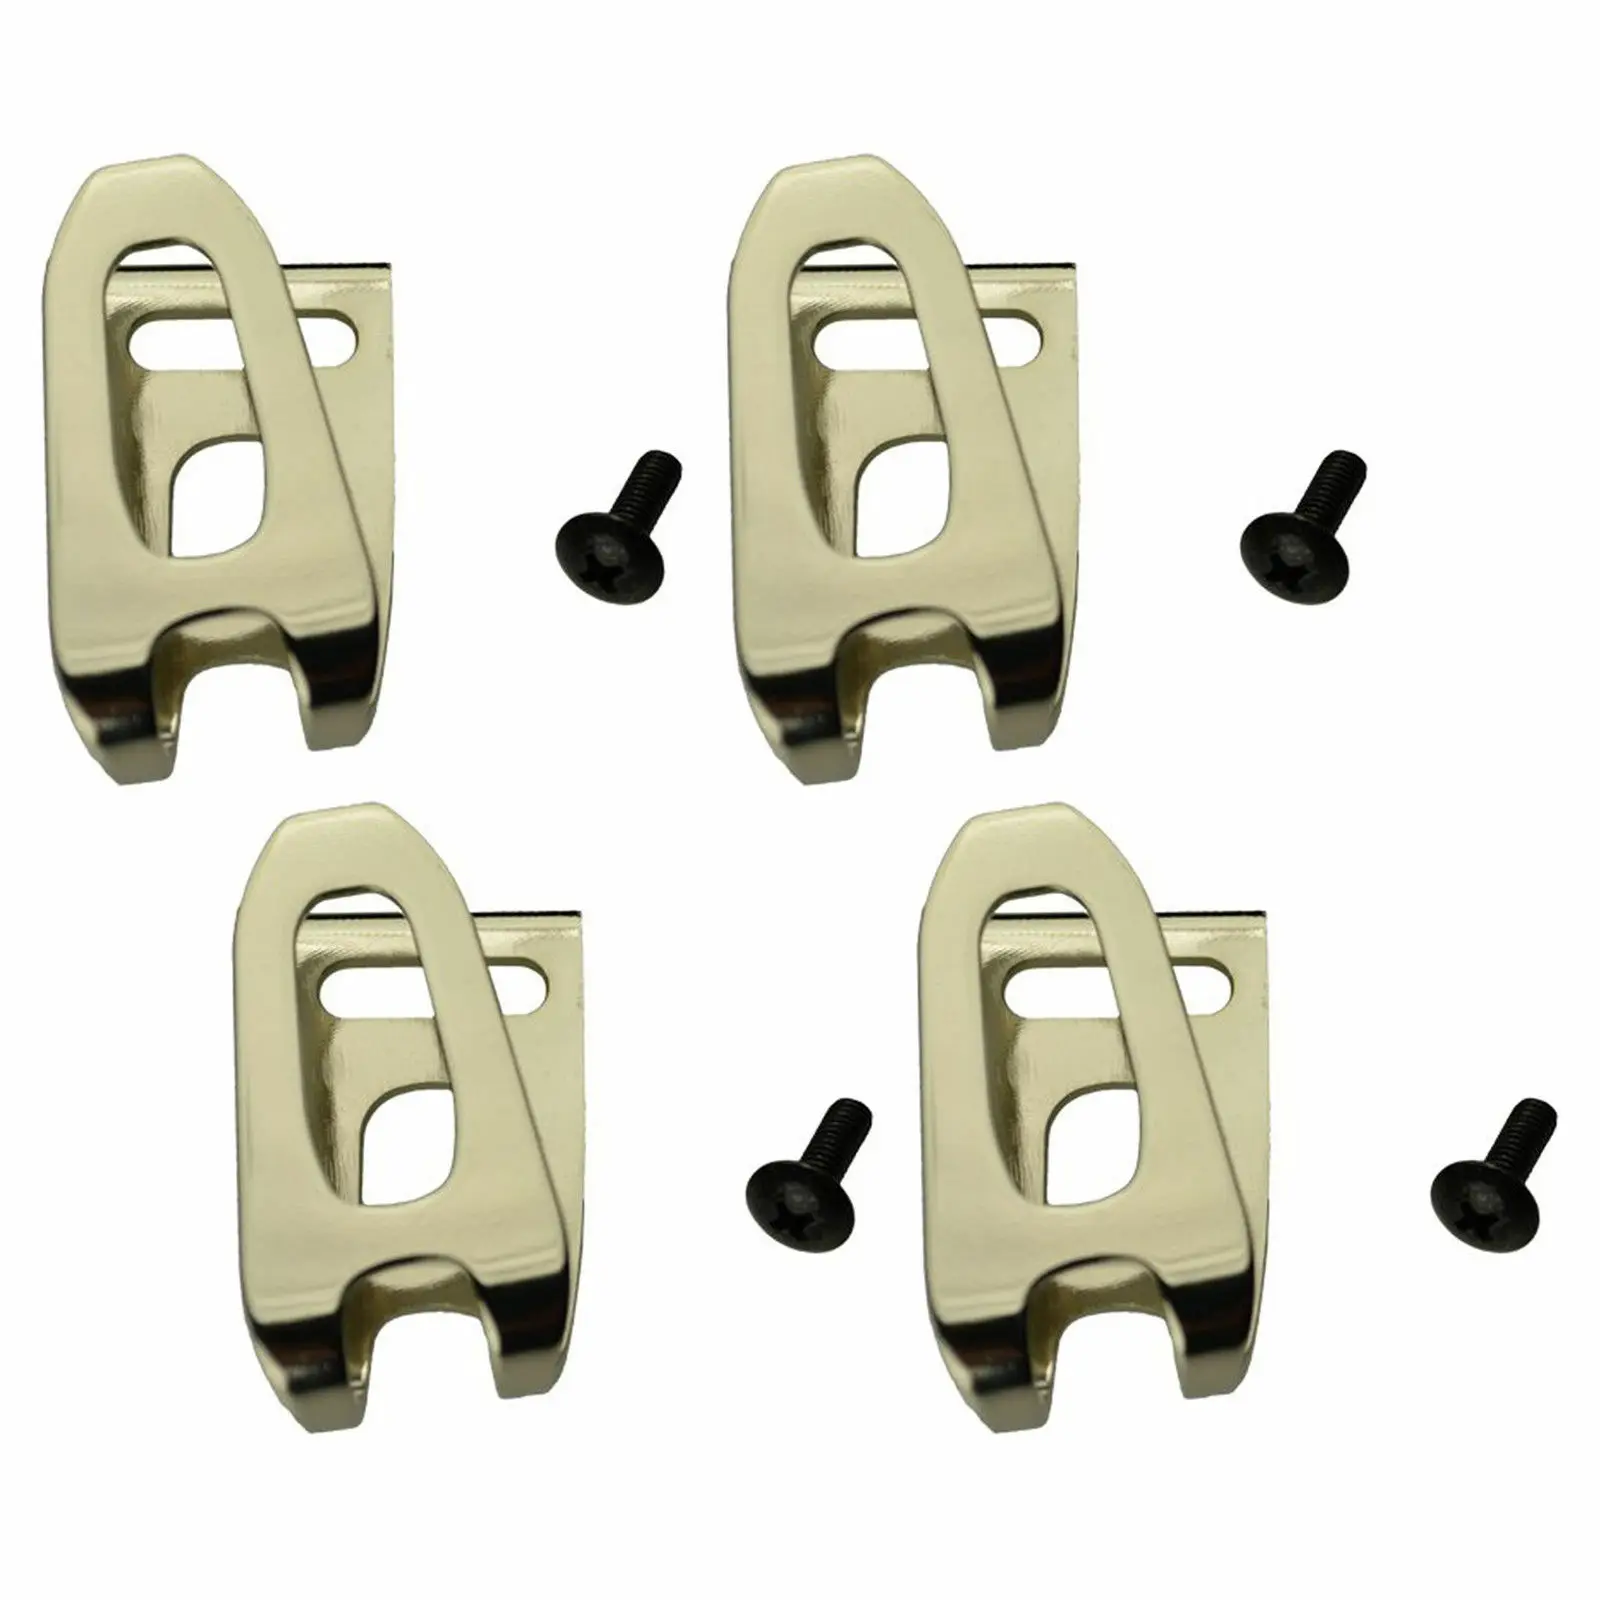 Details about   2x FOR Makita LXT 12V 18V Belt Clips Hooks for Impacts and Drills & screw BHP452 